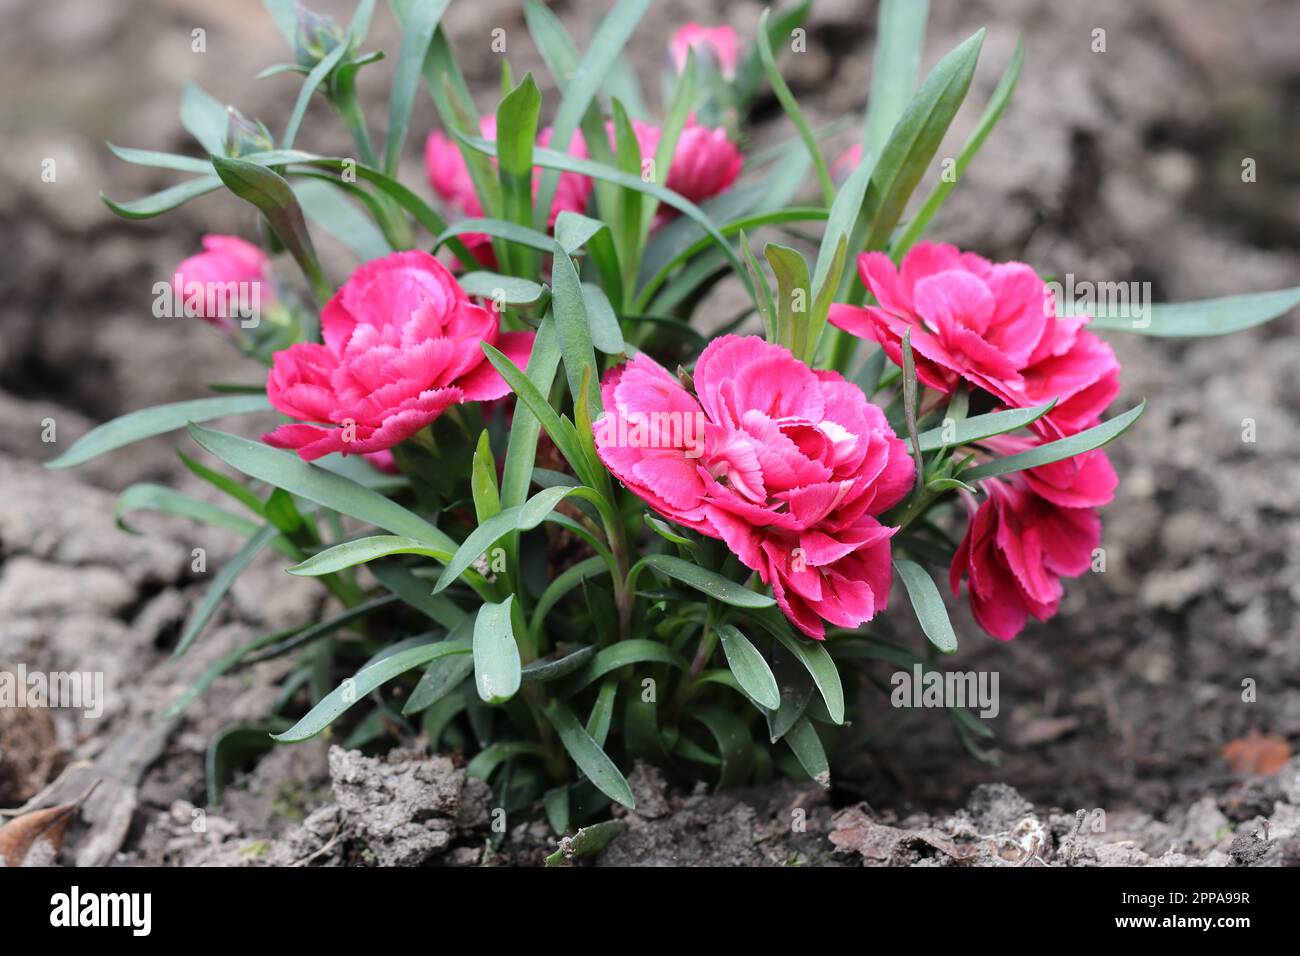 close-up of pink dianthus flowers in a garden bed Stock Photo